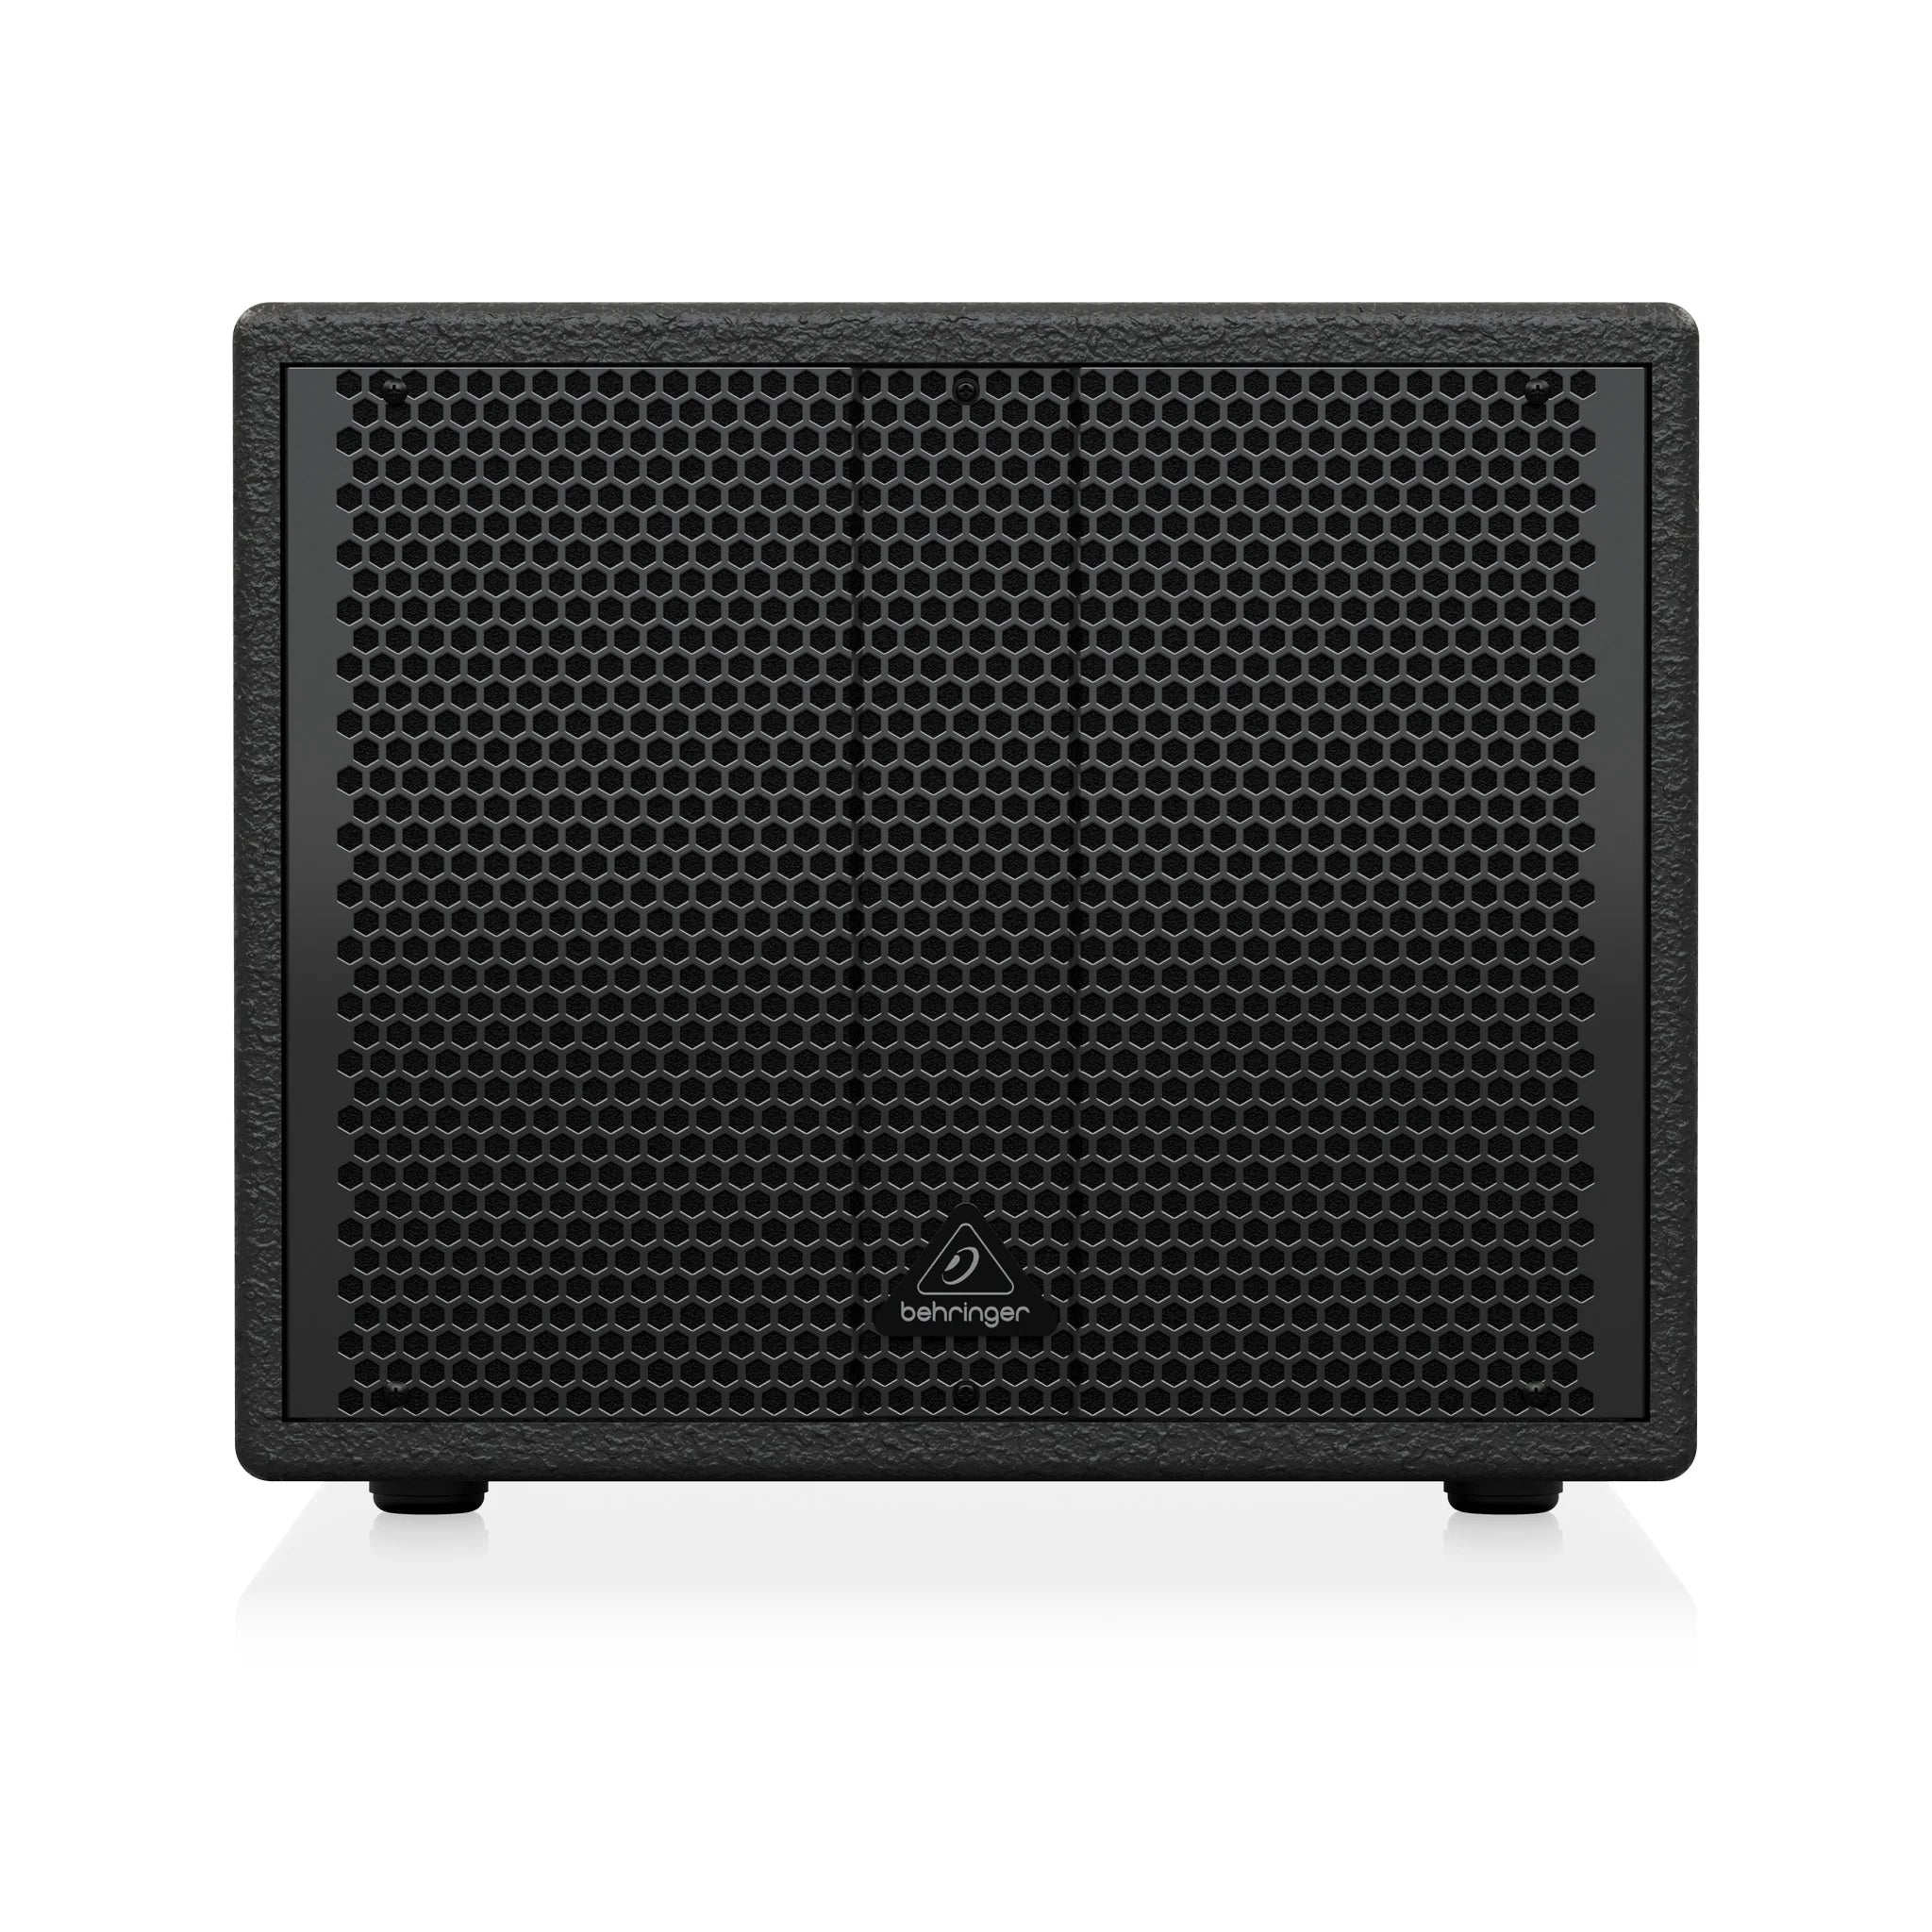 Behringer SAT 1008 SUBA Active 360W 8" PA Subwoofer with Built-In Stereo Crossover   